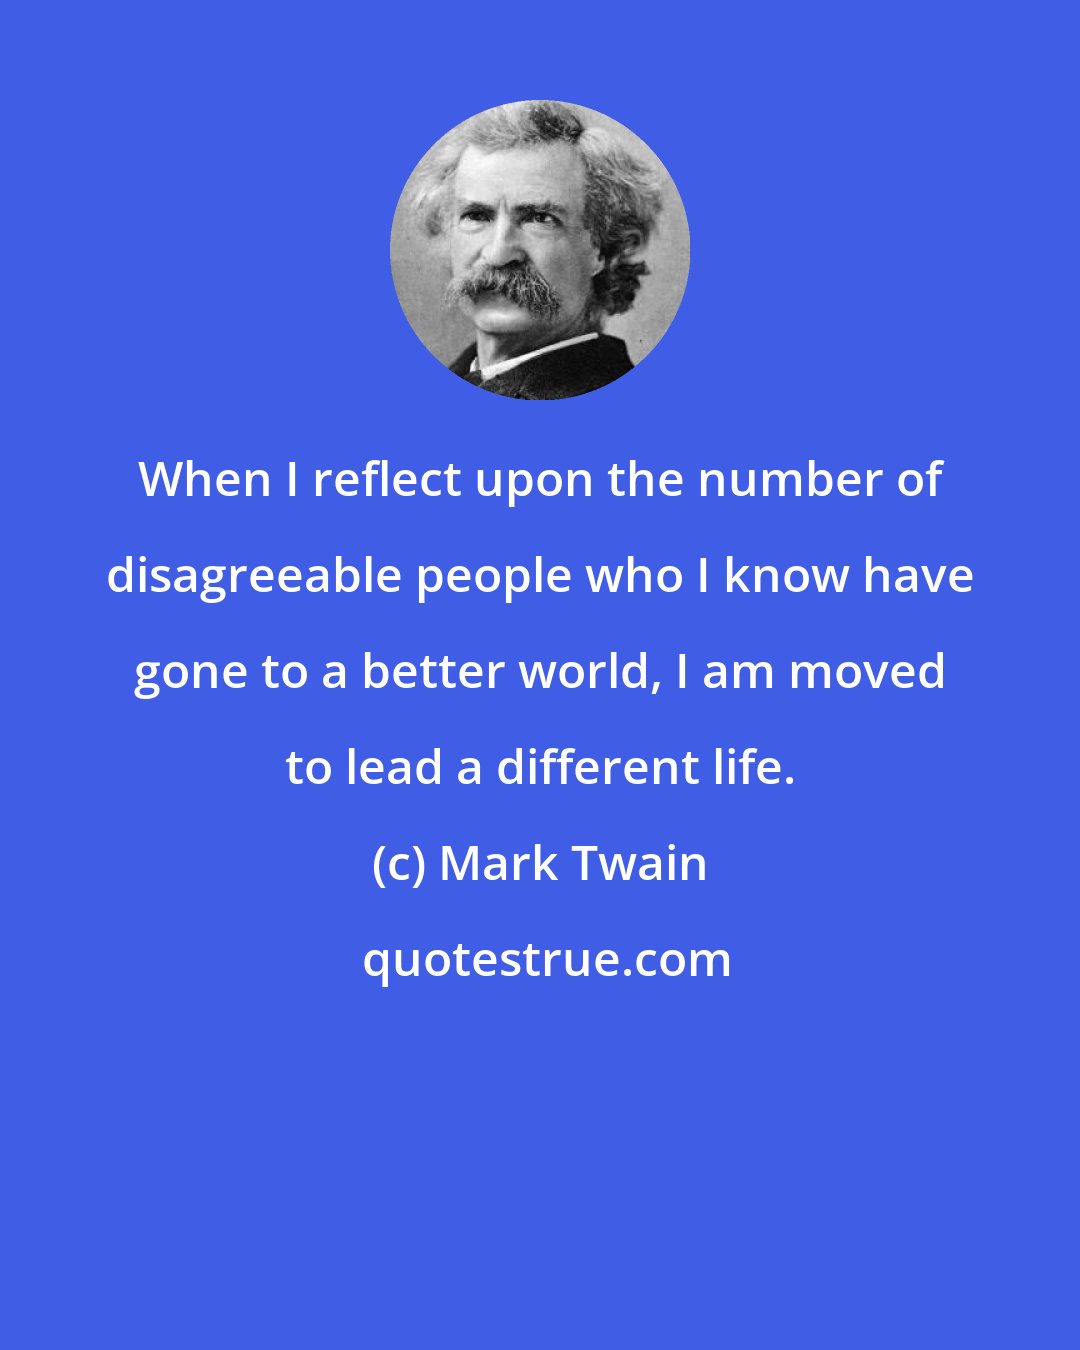 Mark Twain: When I reflect upon the number of disagreeable people who I know have gone to a better world, I am moved to lead a different life.